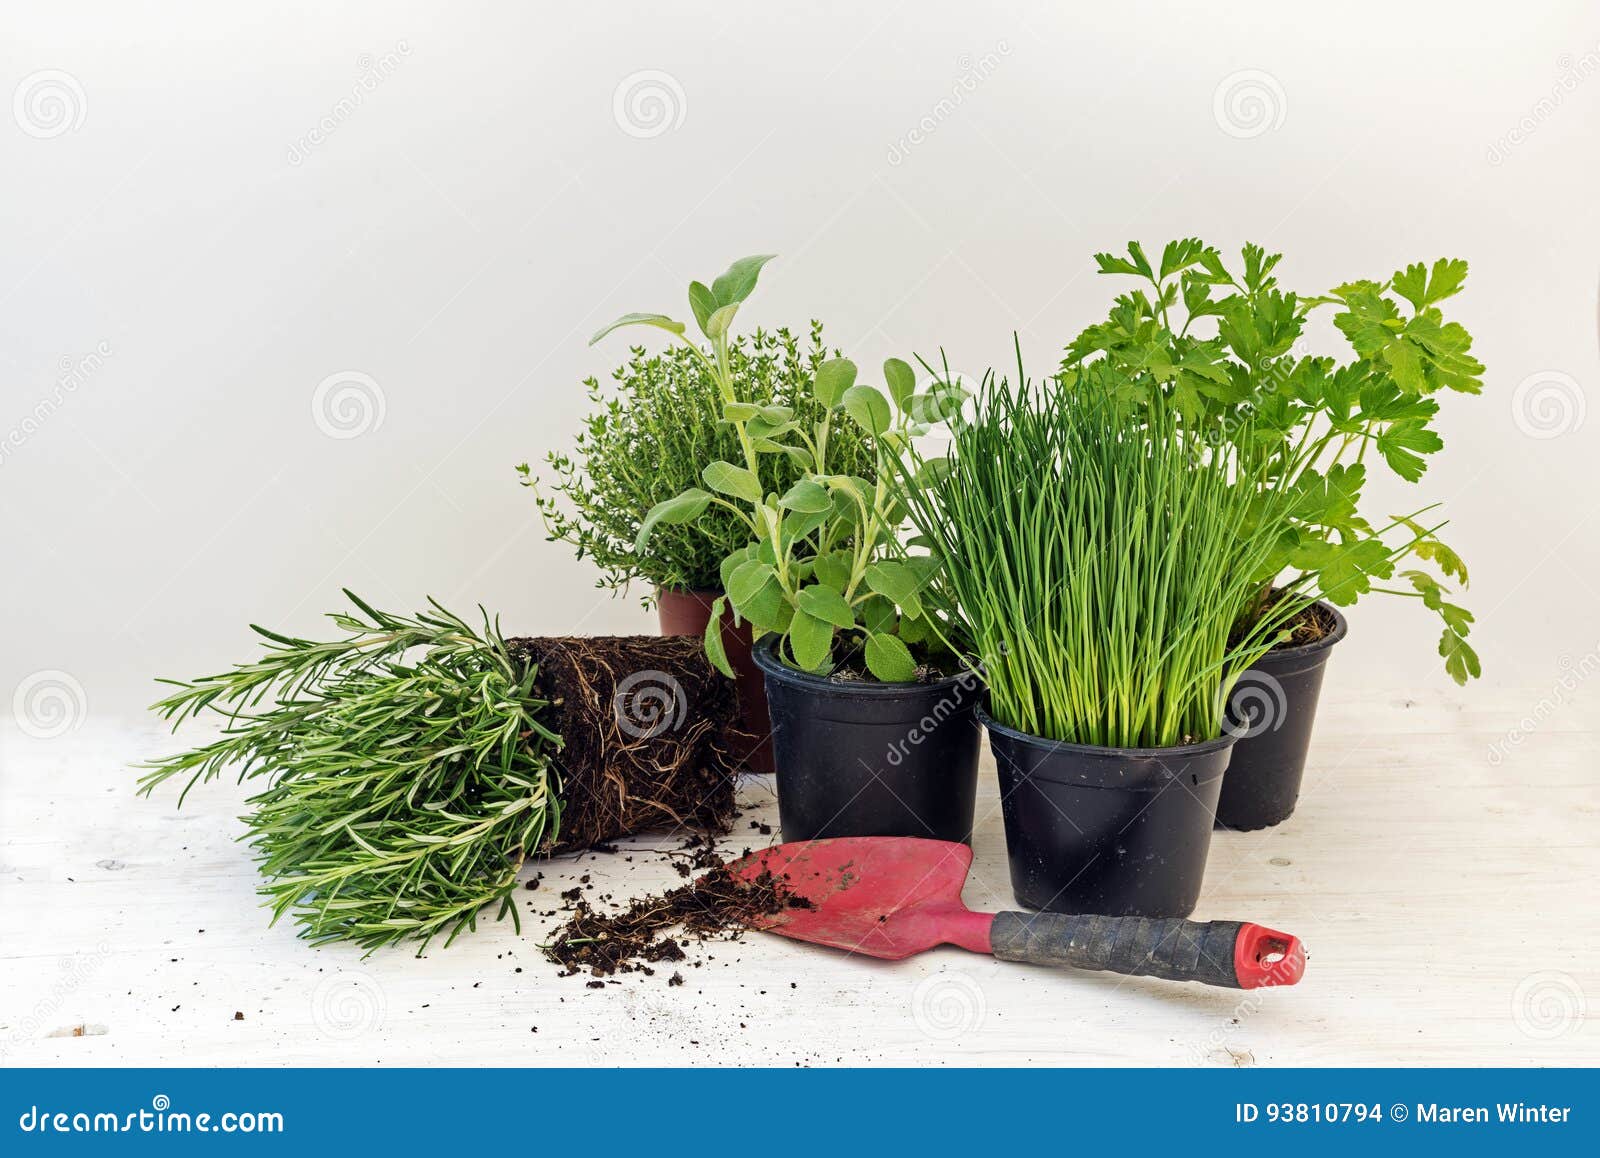 kitchen herb plants in pots such as rosemary, thyme, parsley, sa